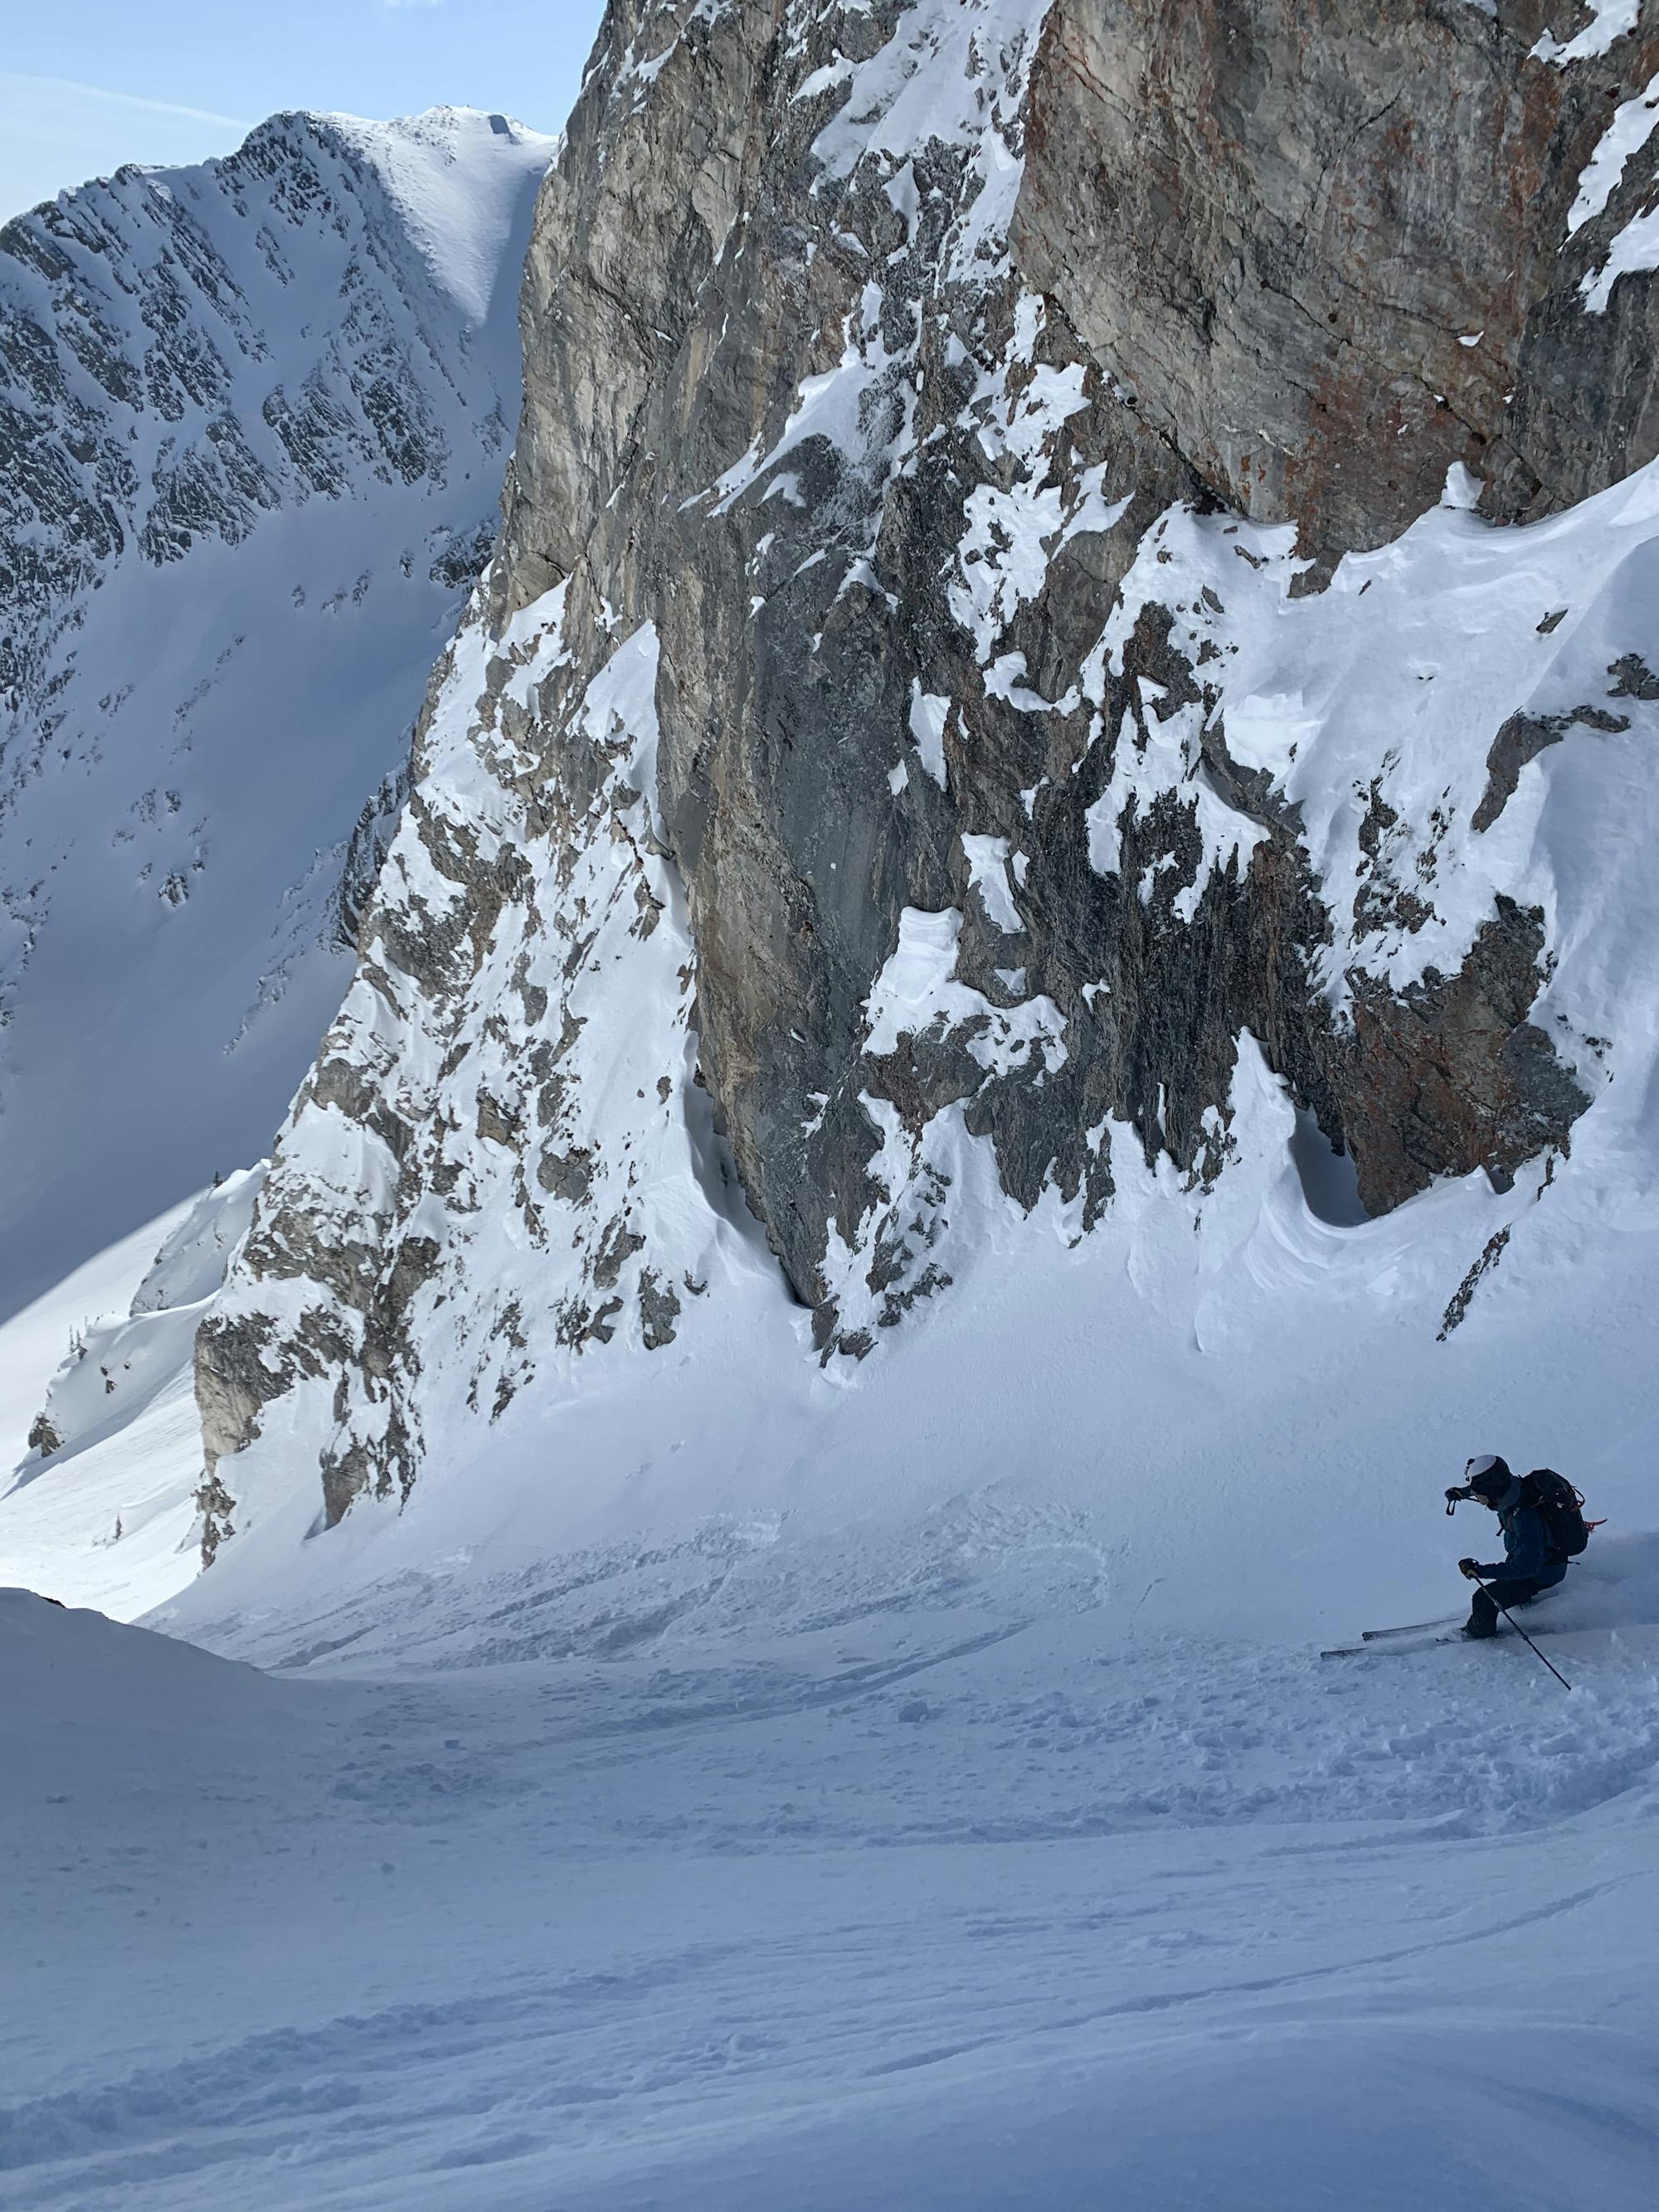 Dropping into the Couloir